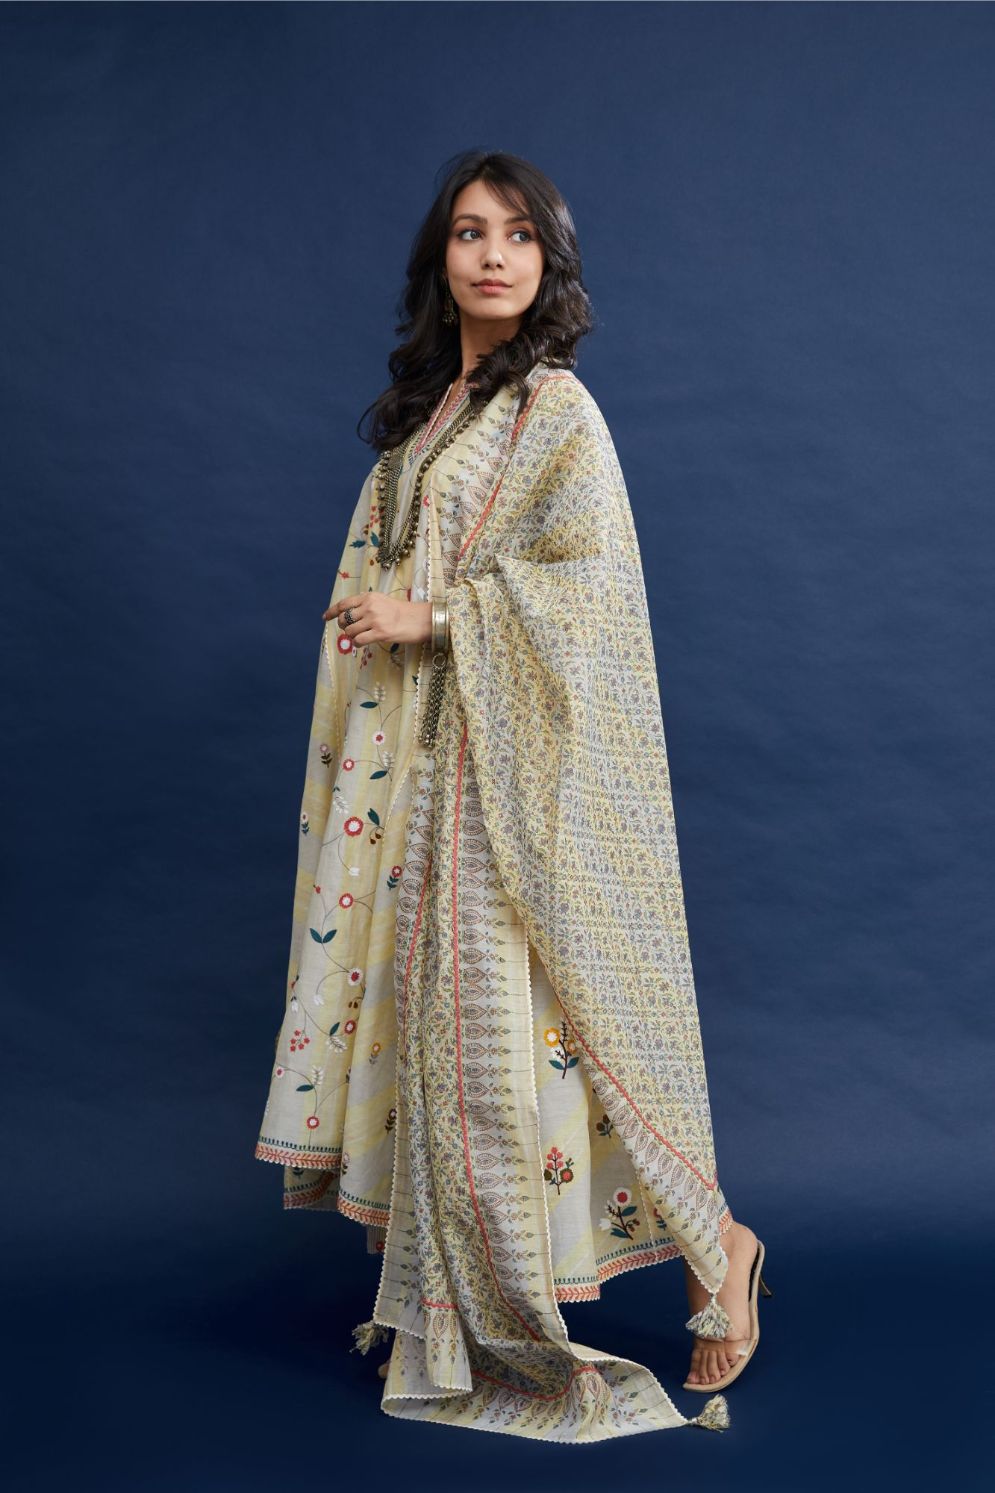 Beige hand block printed cotton Chanderi kurta set with asymmetric hem, highlighted with multi colored thread embroidery and ric-rac.